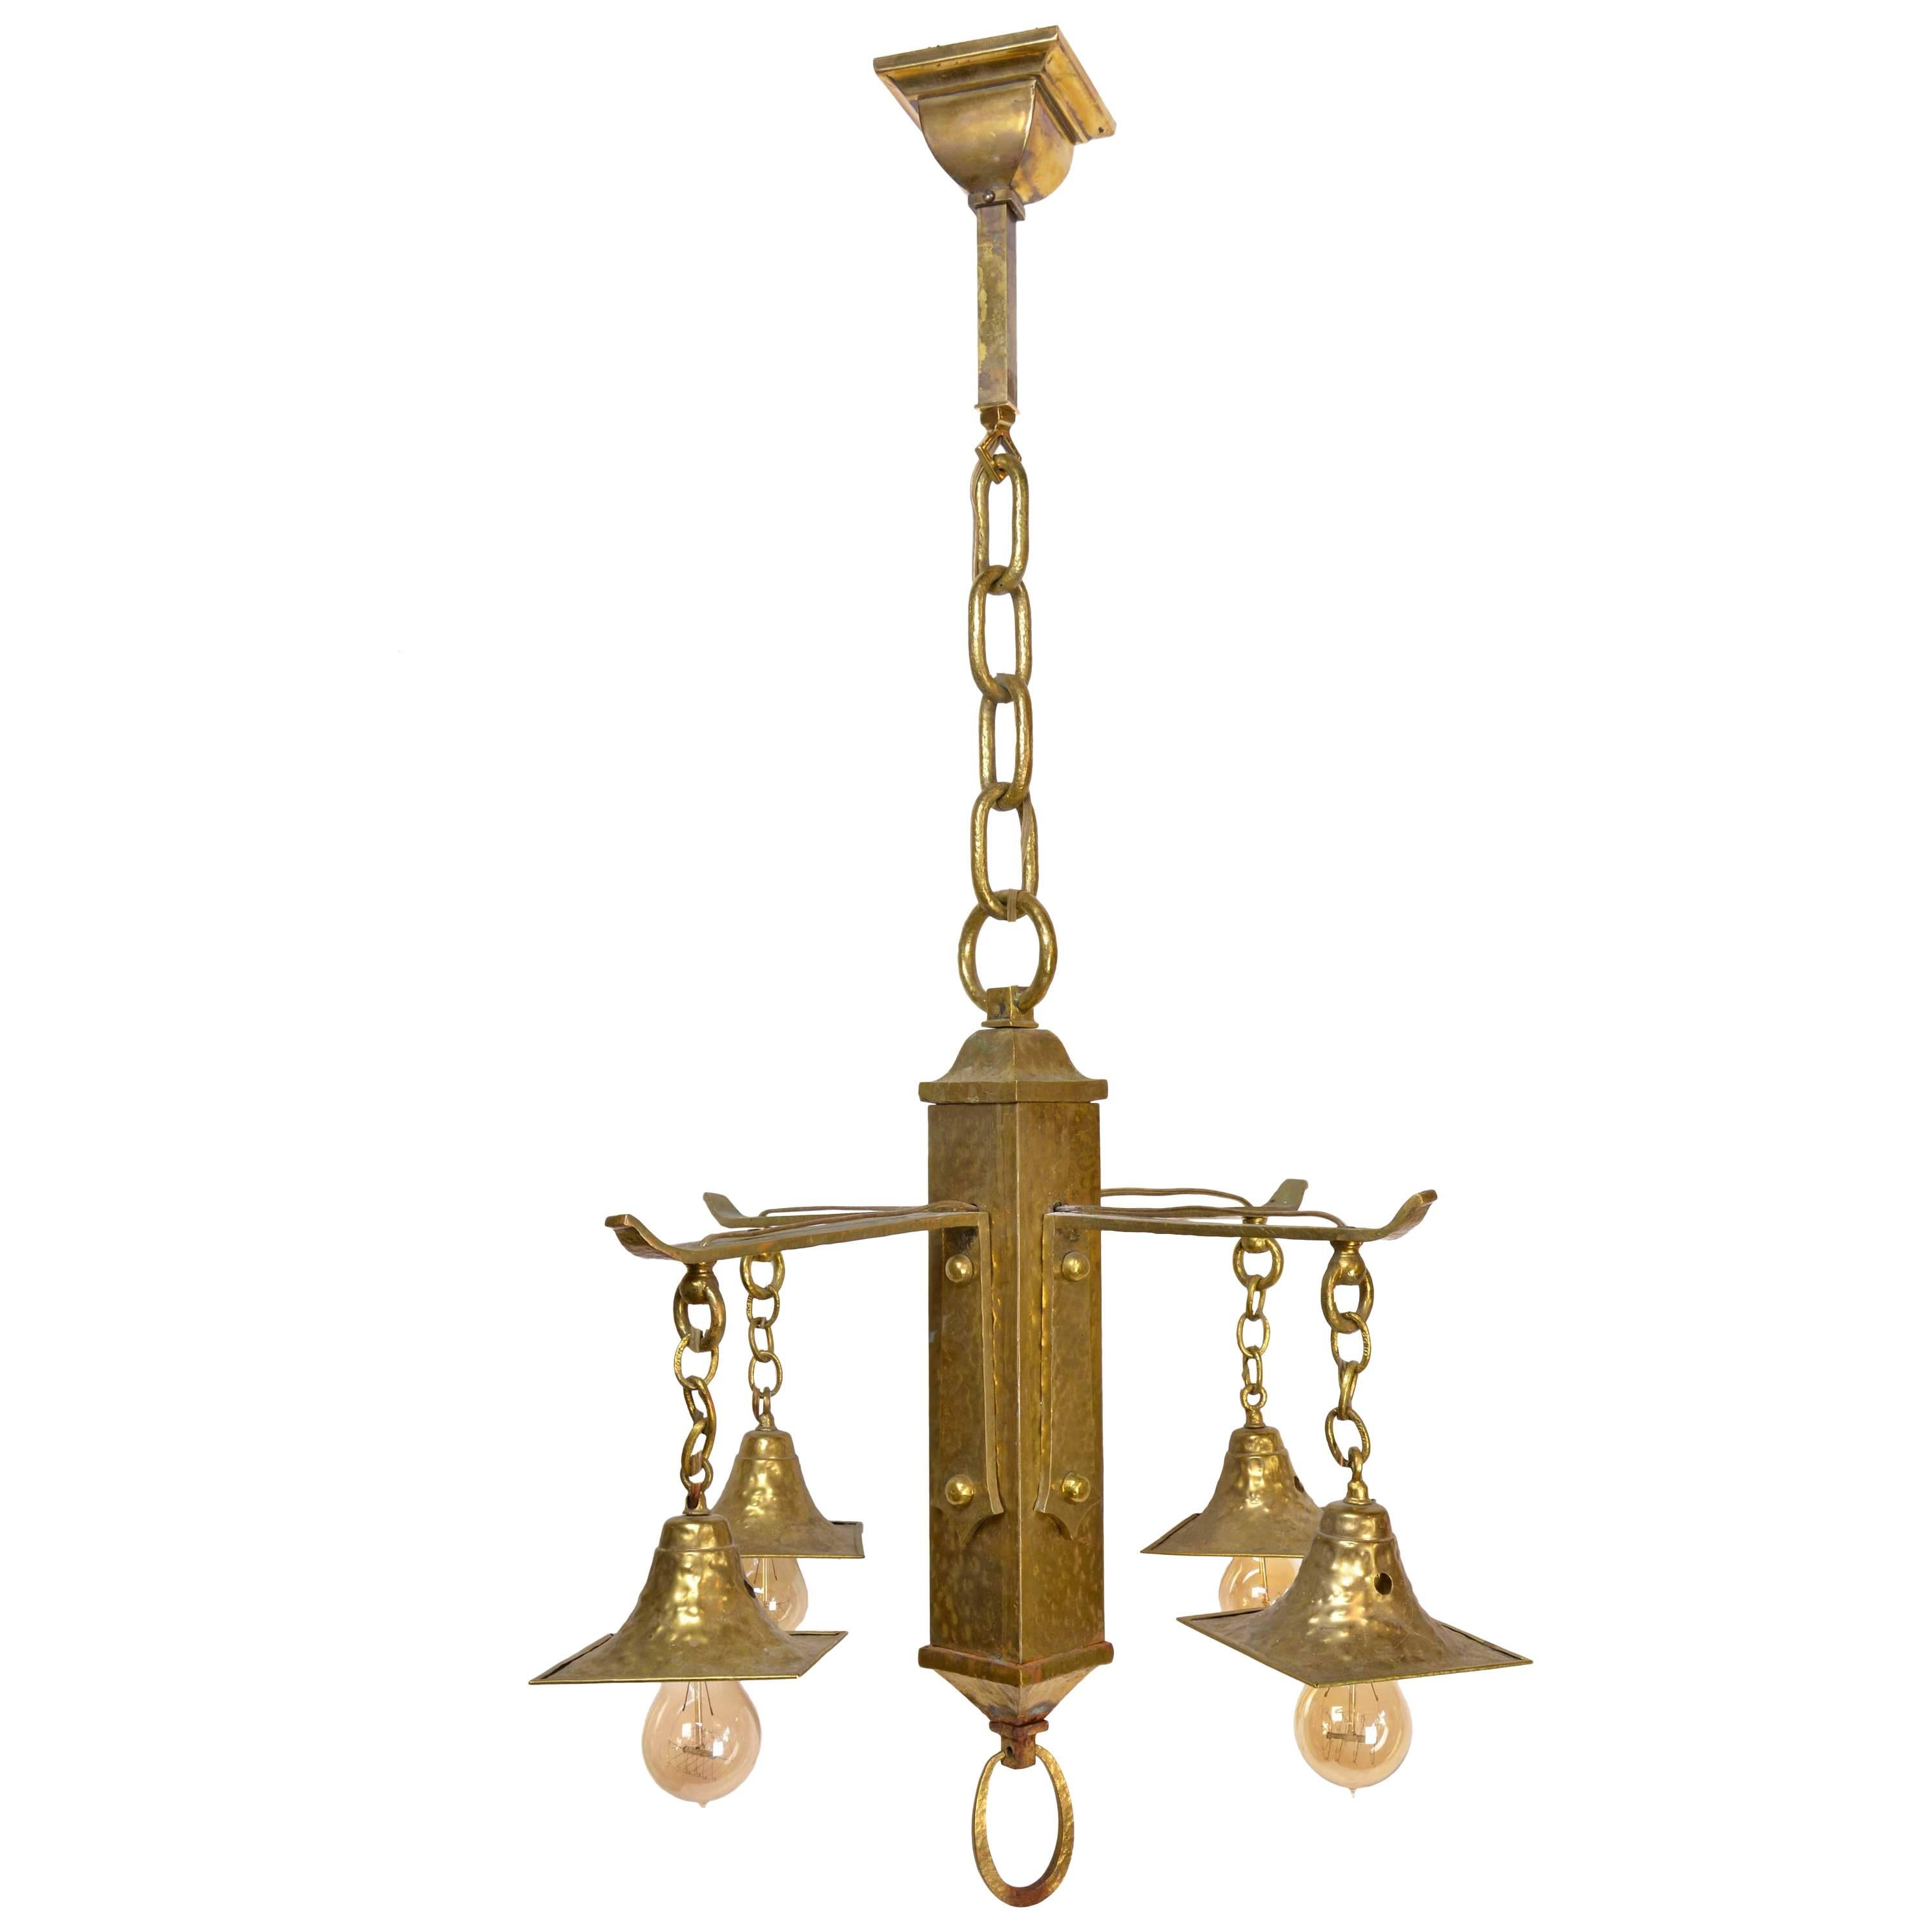 Early 20th Century Hammered Arts & Crafts Four-Arm Chandelier in Brass